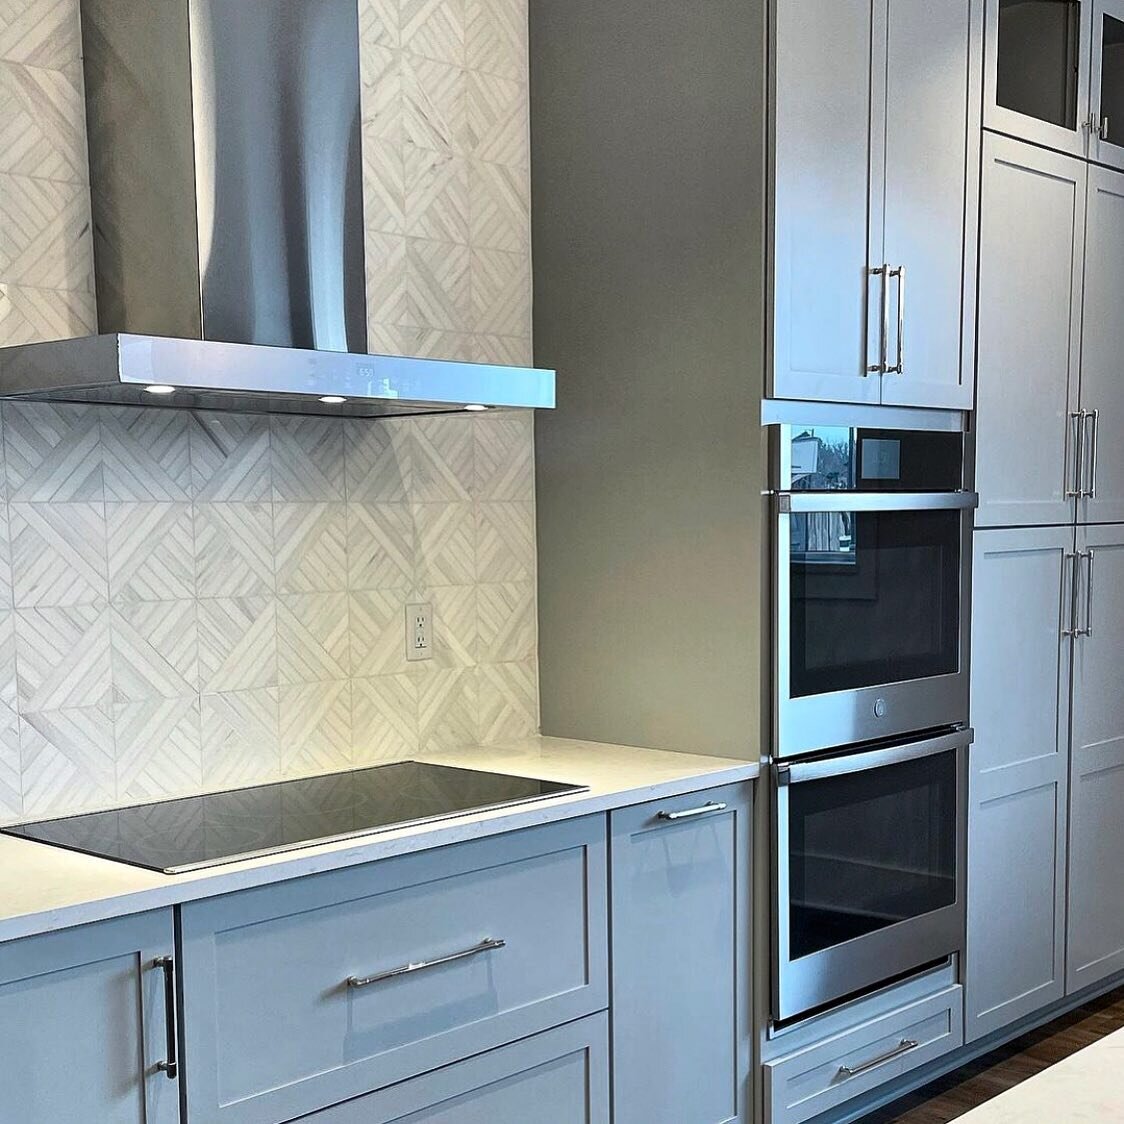 If you haven&rsquo;t been to @n.good.co yet you need to see this special space. We love every inch of this place and are thrilled with how all her tile selections turned out - this kitchen backsplash is 🔥🔥🔥! 

.
.
.

#tileobsessed #designobsessed
